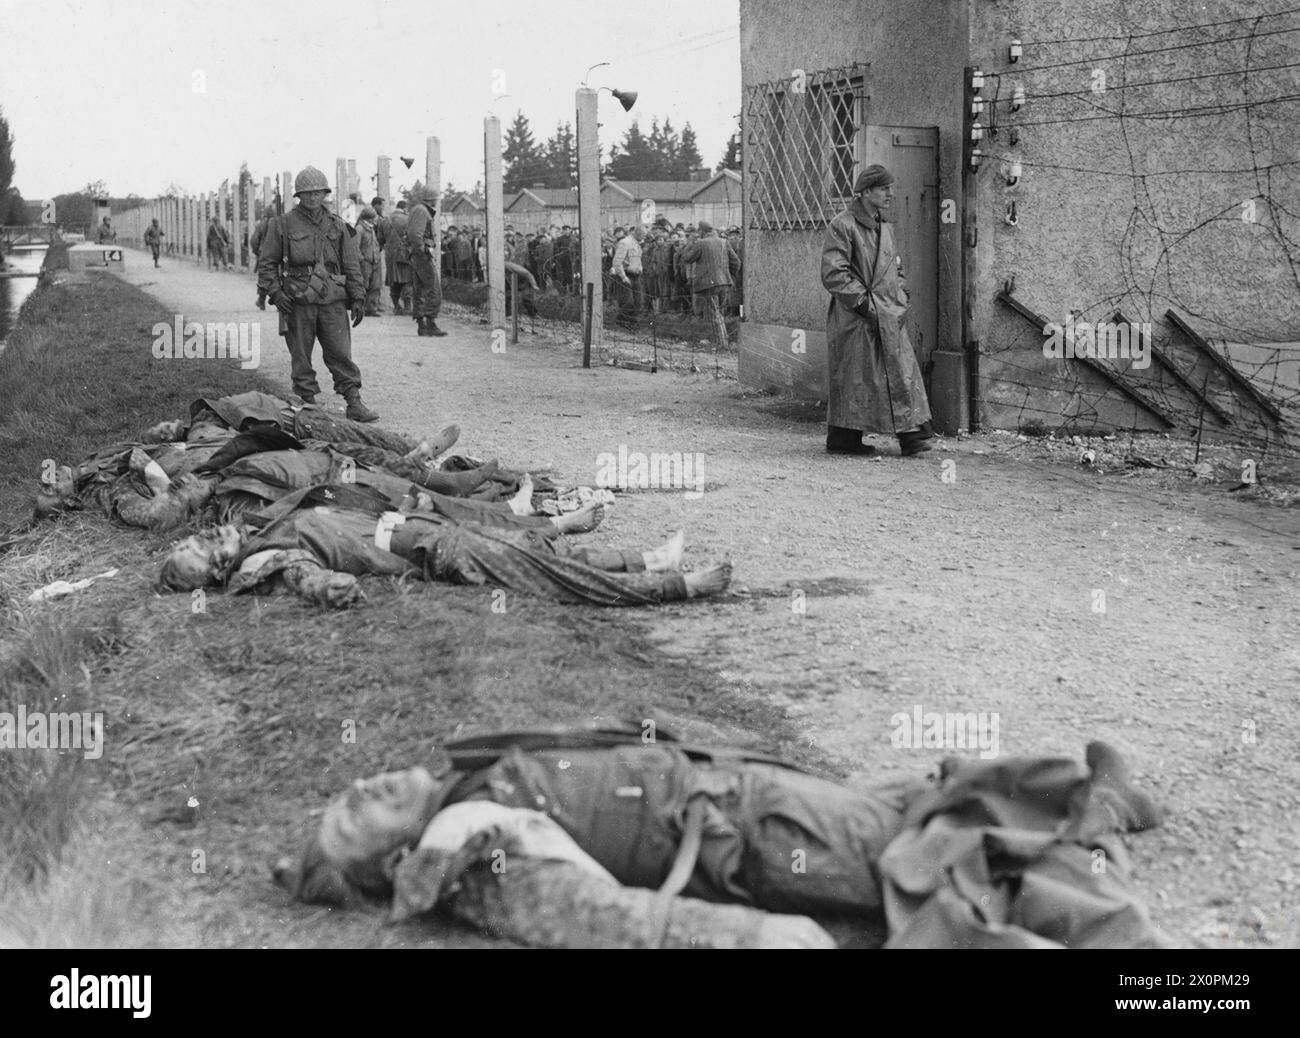 THE HOLOCAUST, 1941-1945 - Bodies of some of the former SS guards lie stretched out on the of a moat surrounding the Dachau concentration camp as troops of the Seventh US Army patrol the area and check liberated prisoners in the electrified barbed wire enclosure, late April 1945 US Army Stock Photo